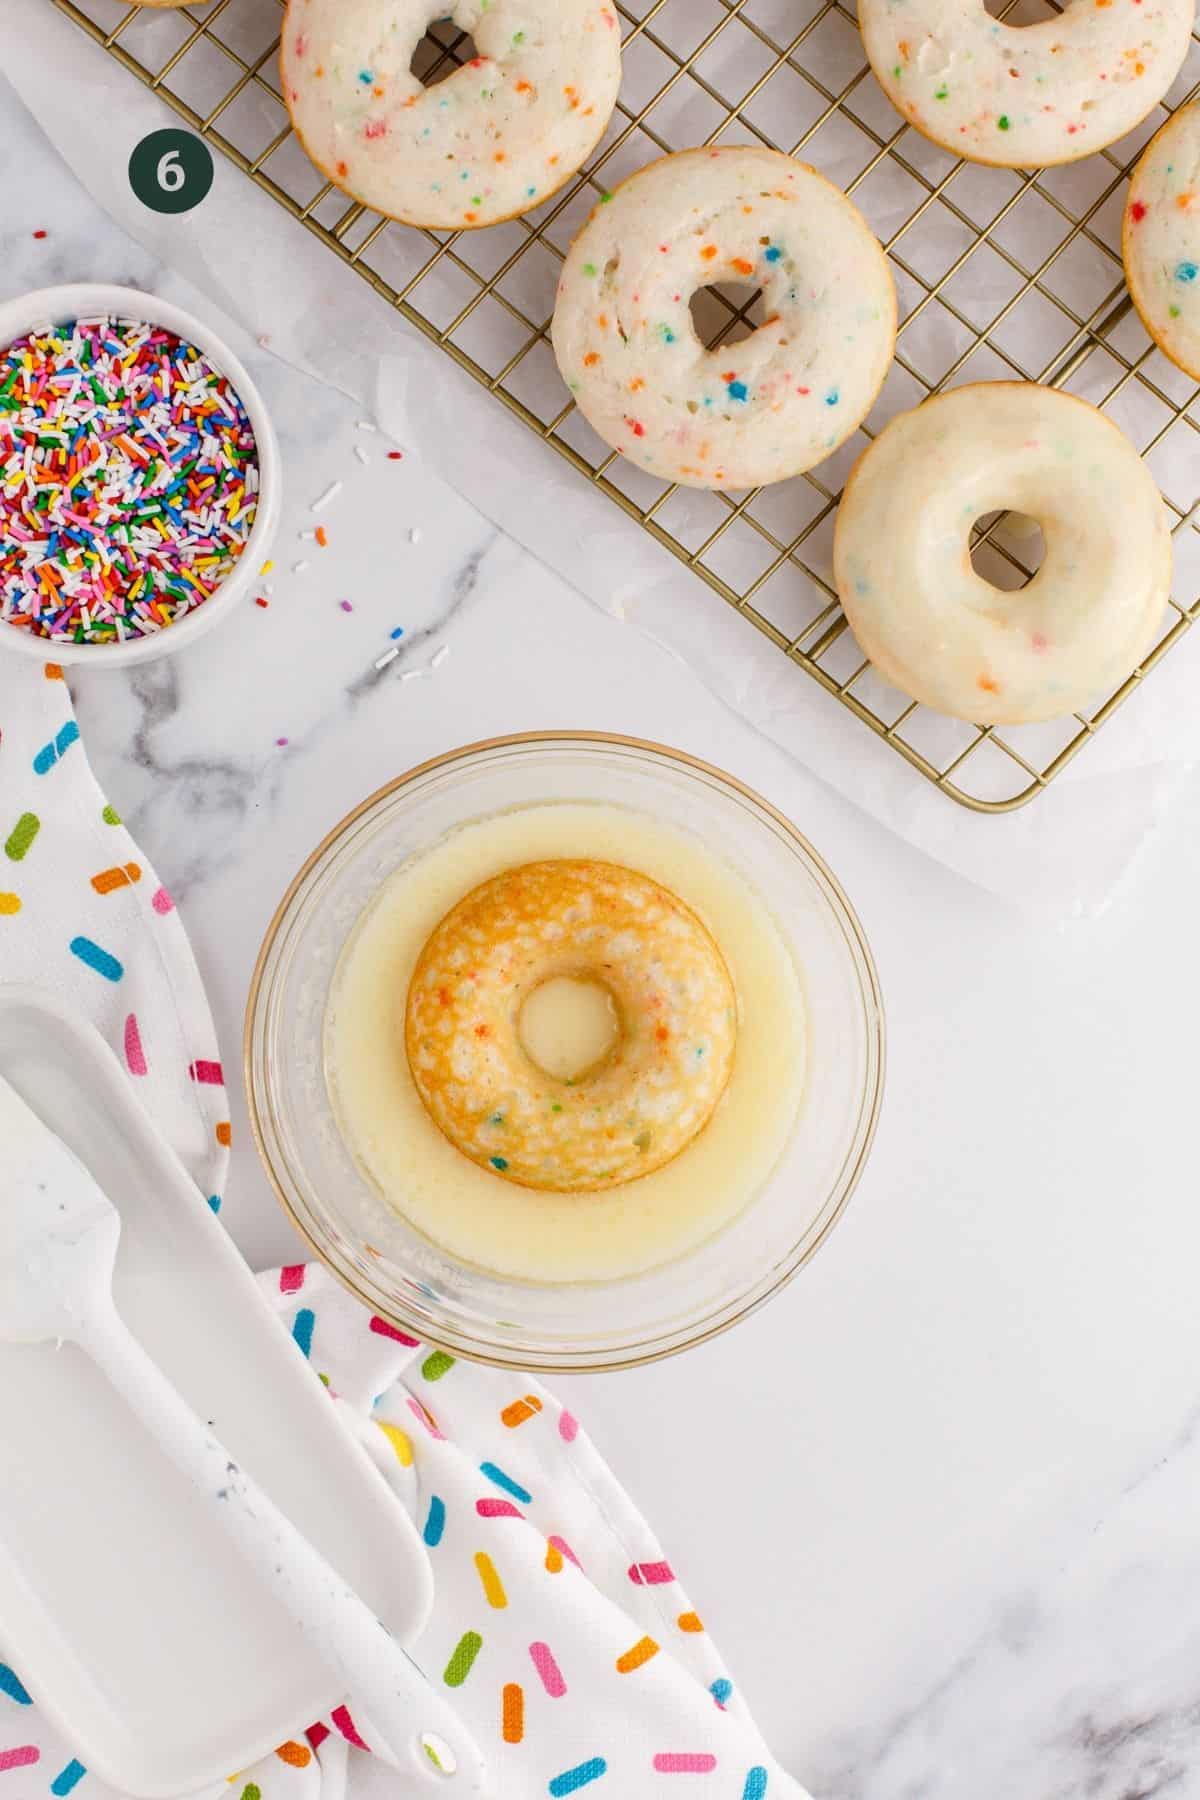 One donut upside down in a bowl of frosting.